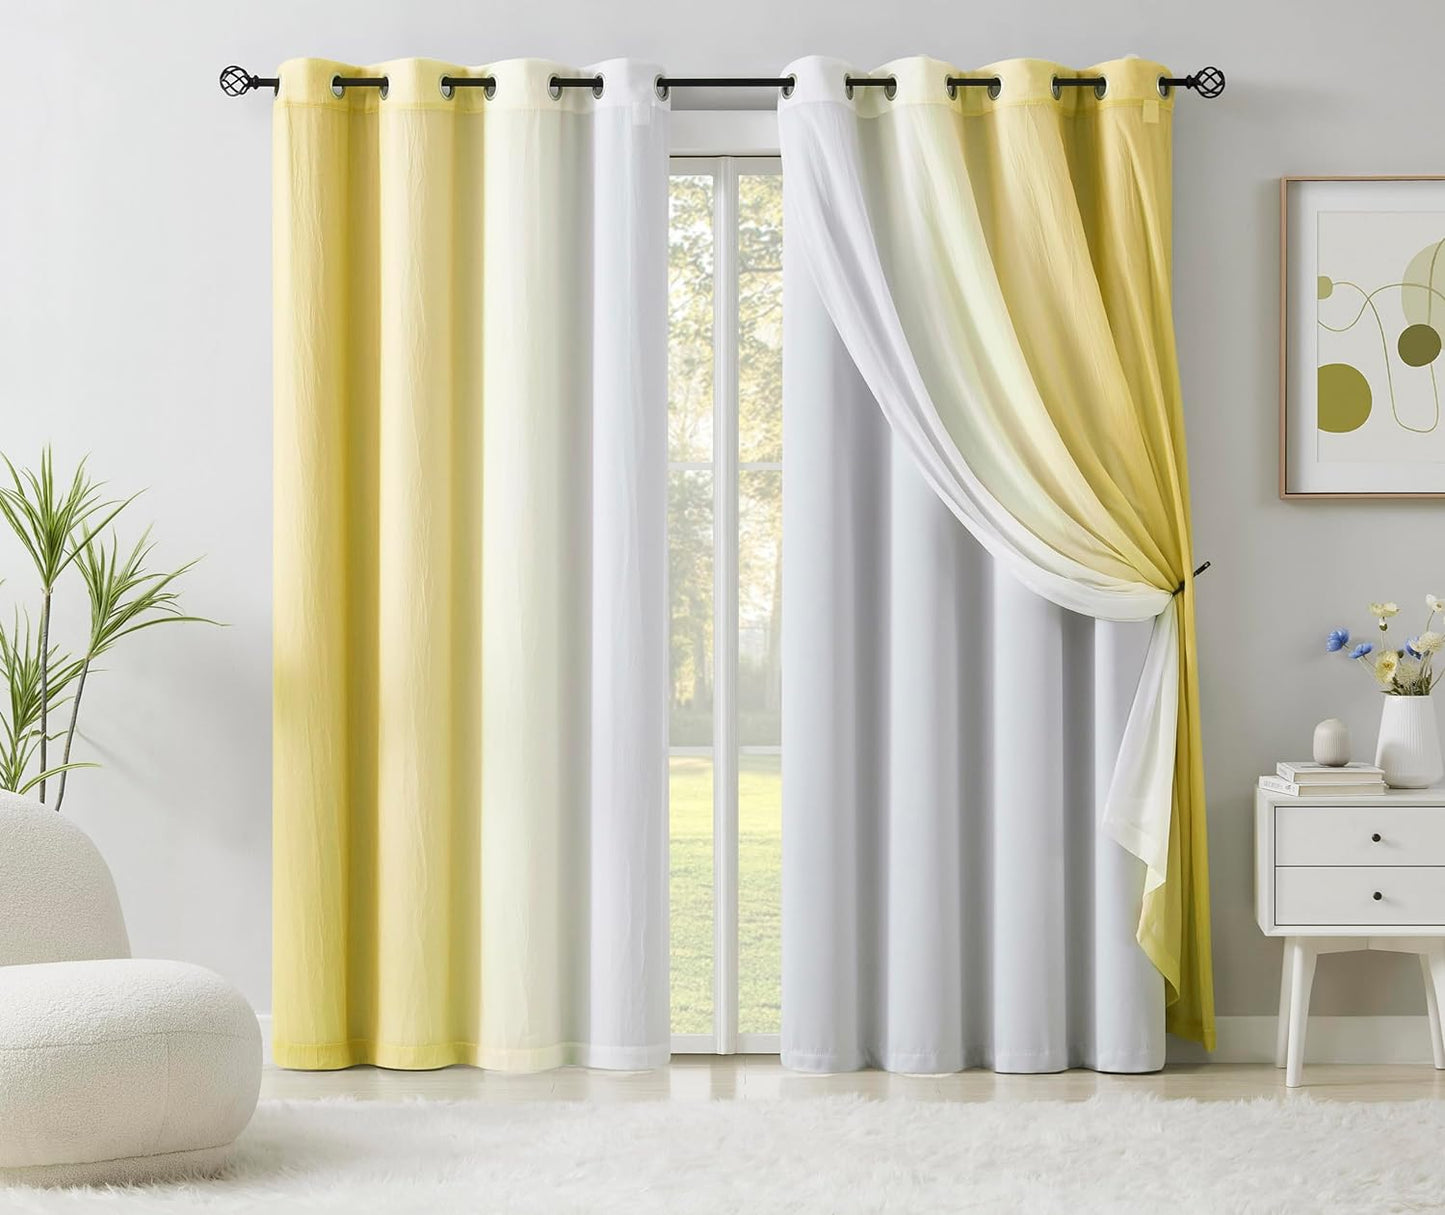 Mix and Match Blackout Curtains - Bedroom Solid Black Full Blackout Window Panels & Black Chiffon Sheer Curtains Thermal Insulated Drapes for Living Room, Grommet, 52" W X 63" L, Set of 4  Purainbow Yellow/White 52" X 63" 